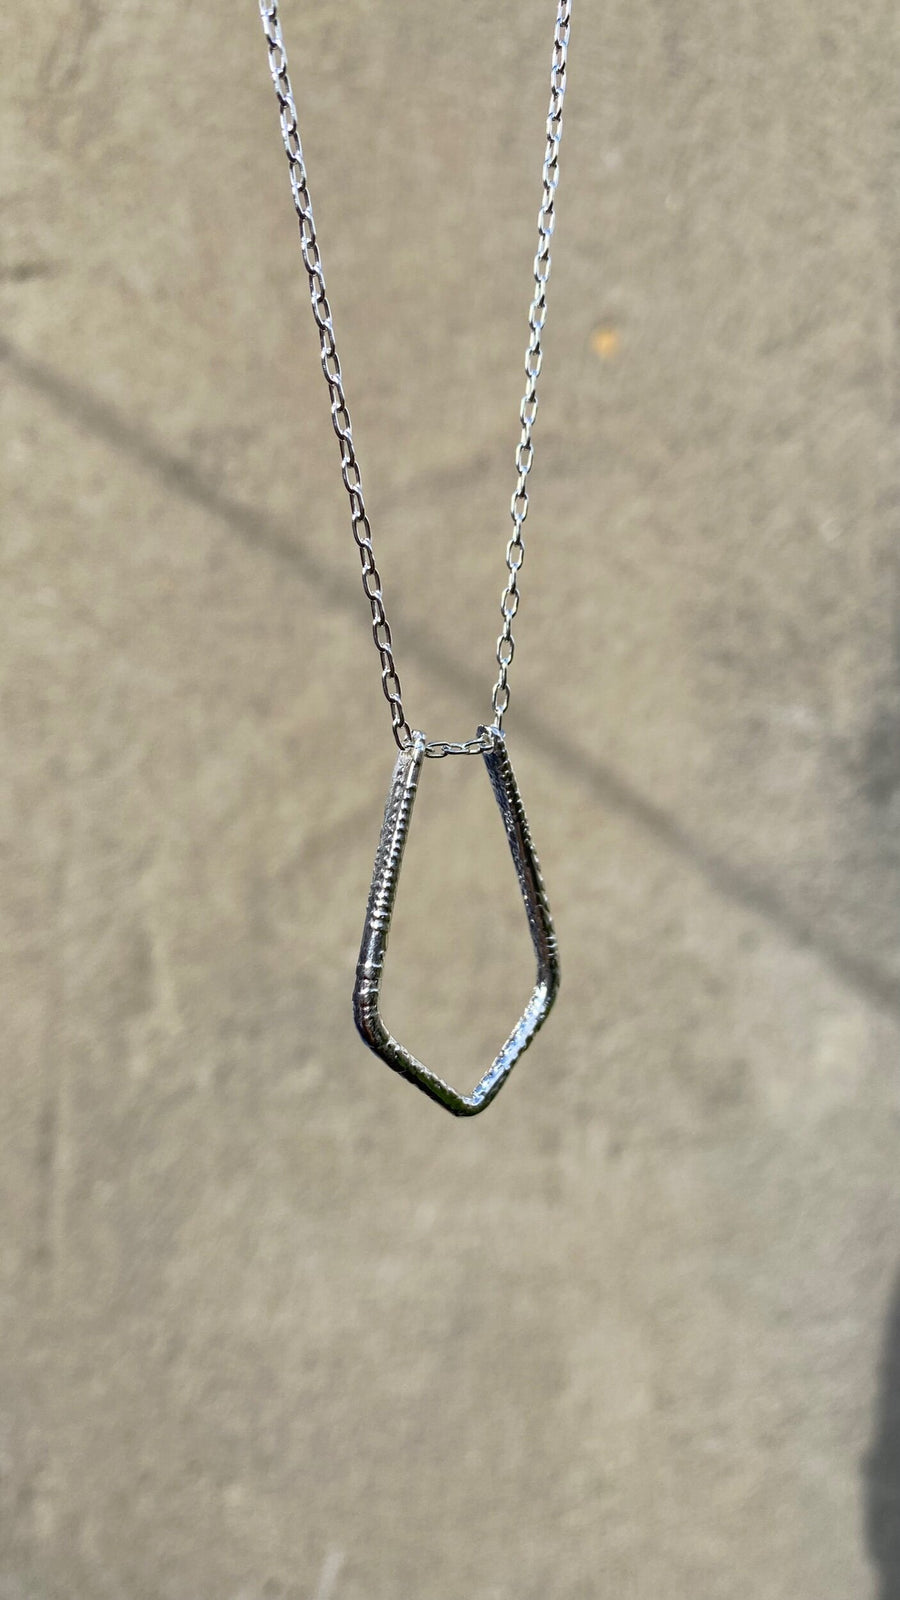 Etched Ring Holder Necklace - wearwell